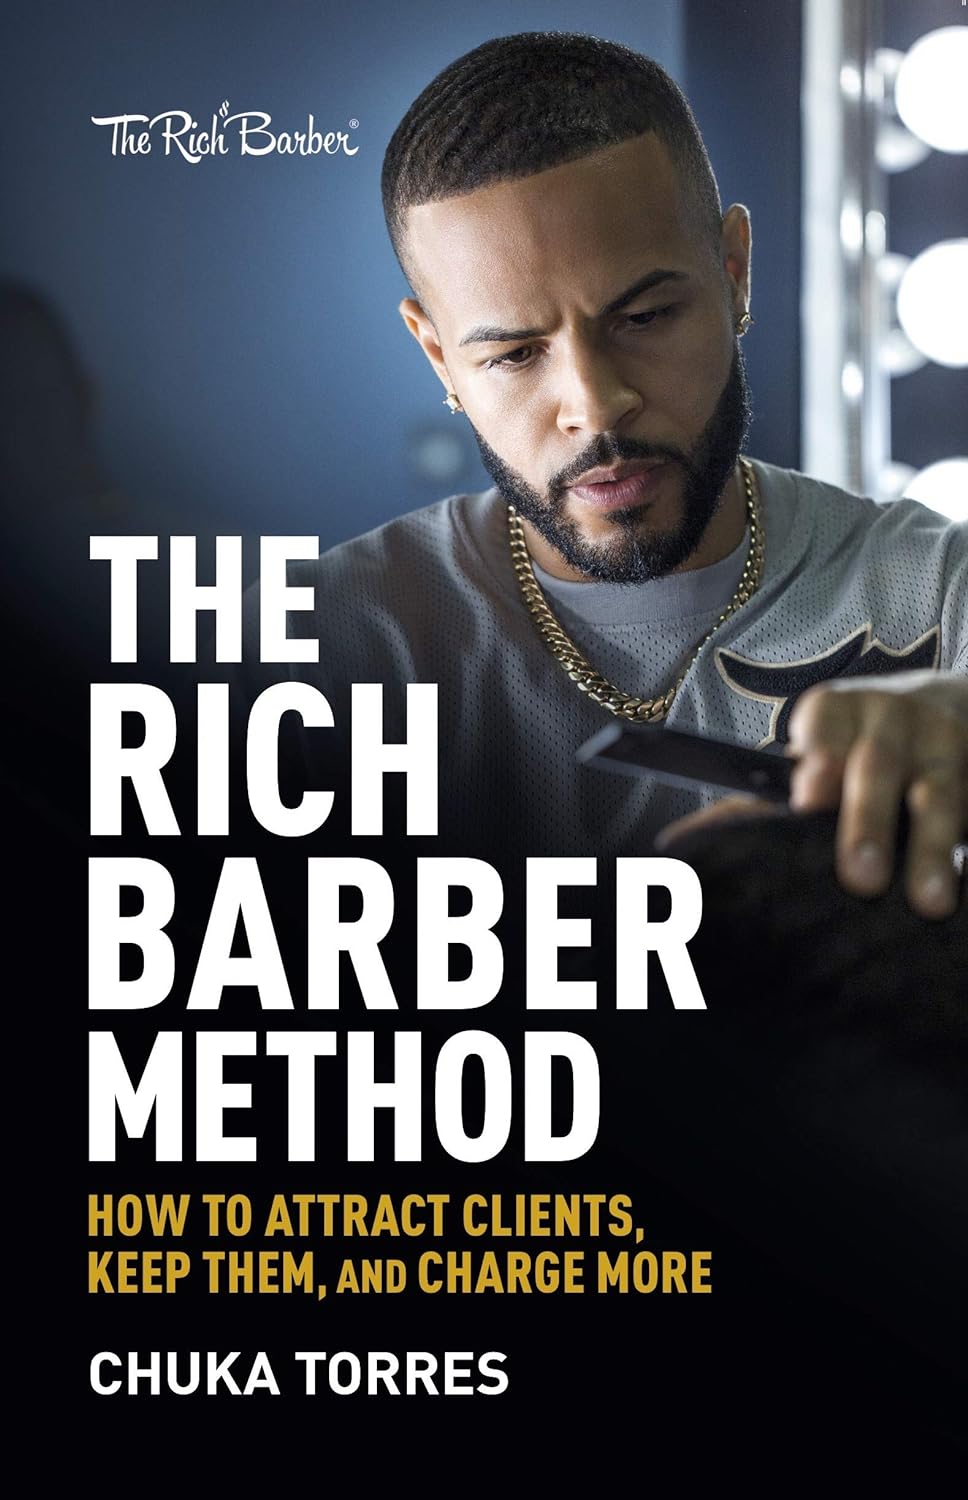 The Rich Barber Method